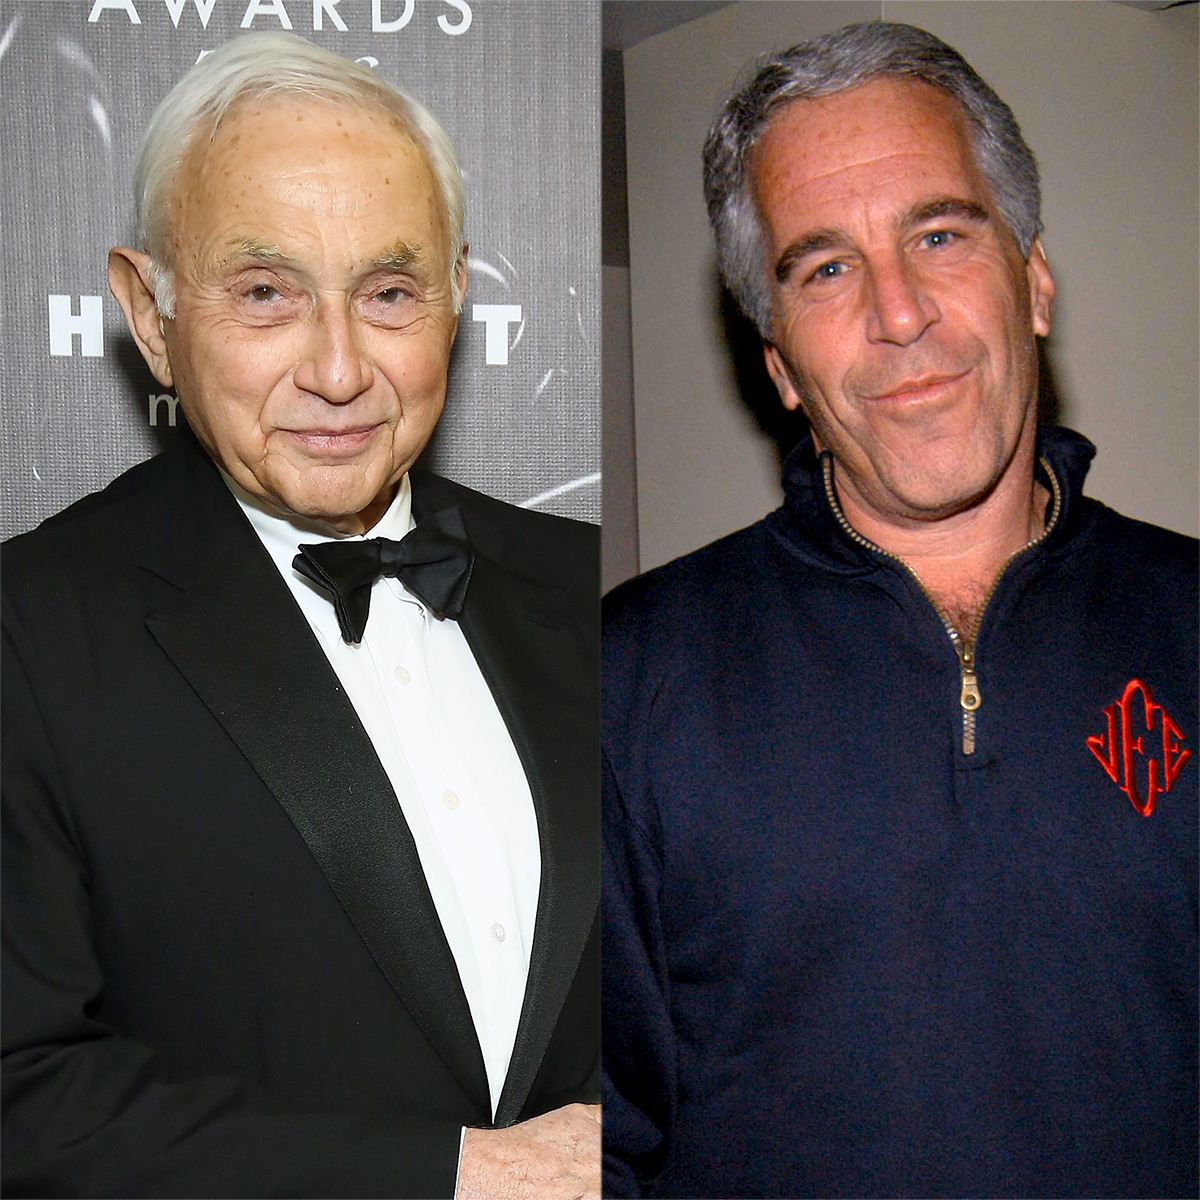 Victoria's Secret Doc Highlights Founder's Ties to Epstein